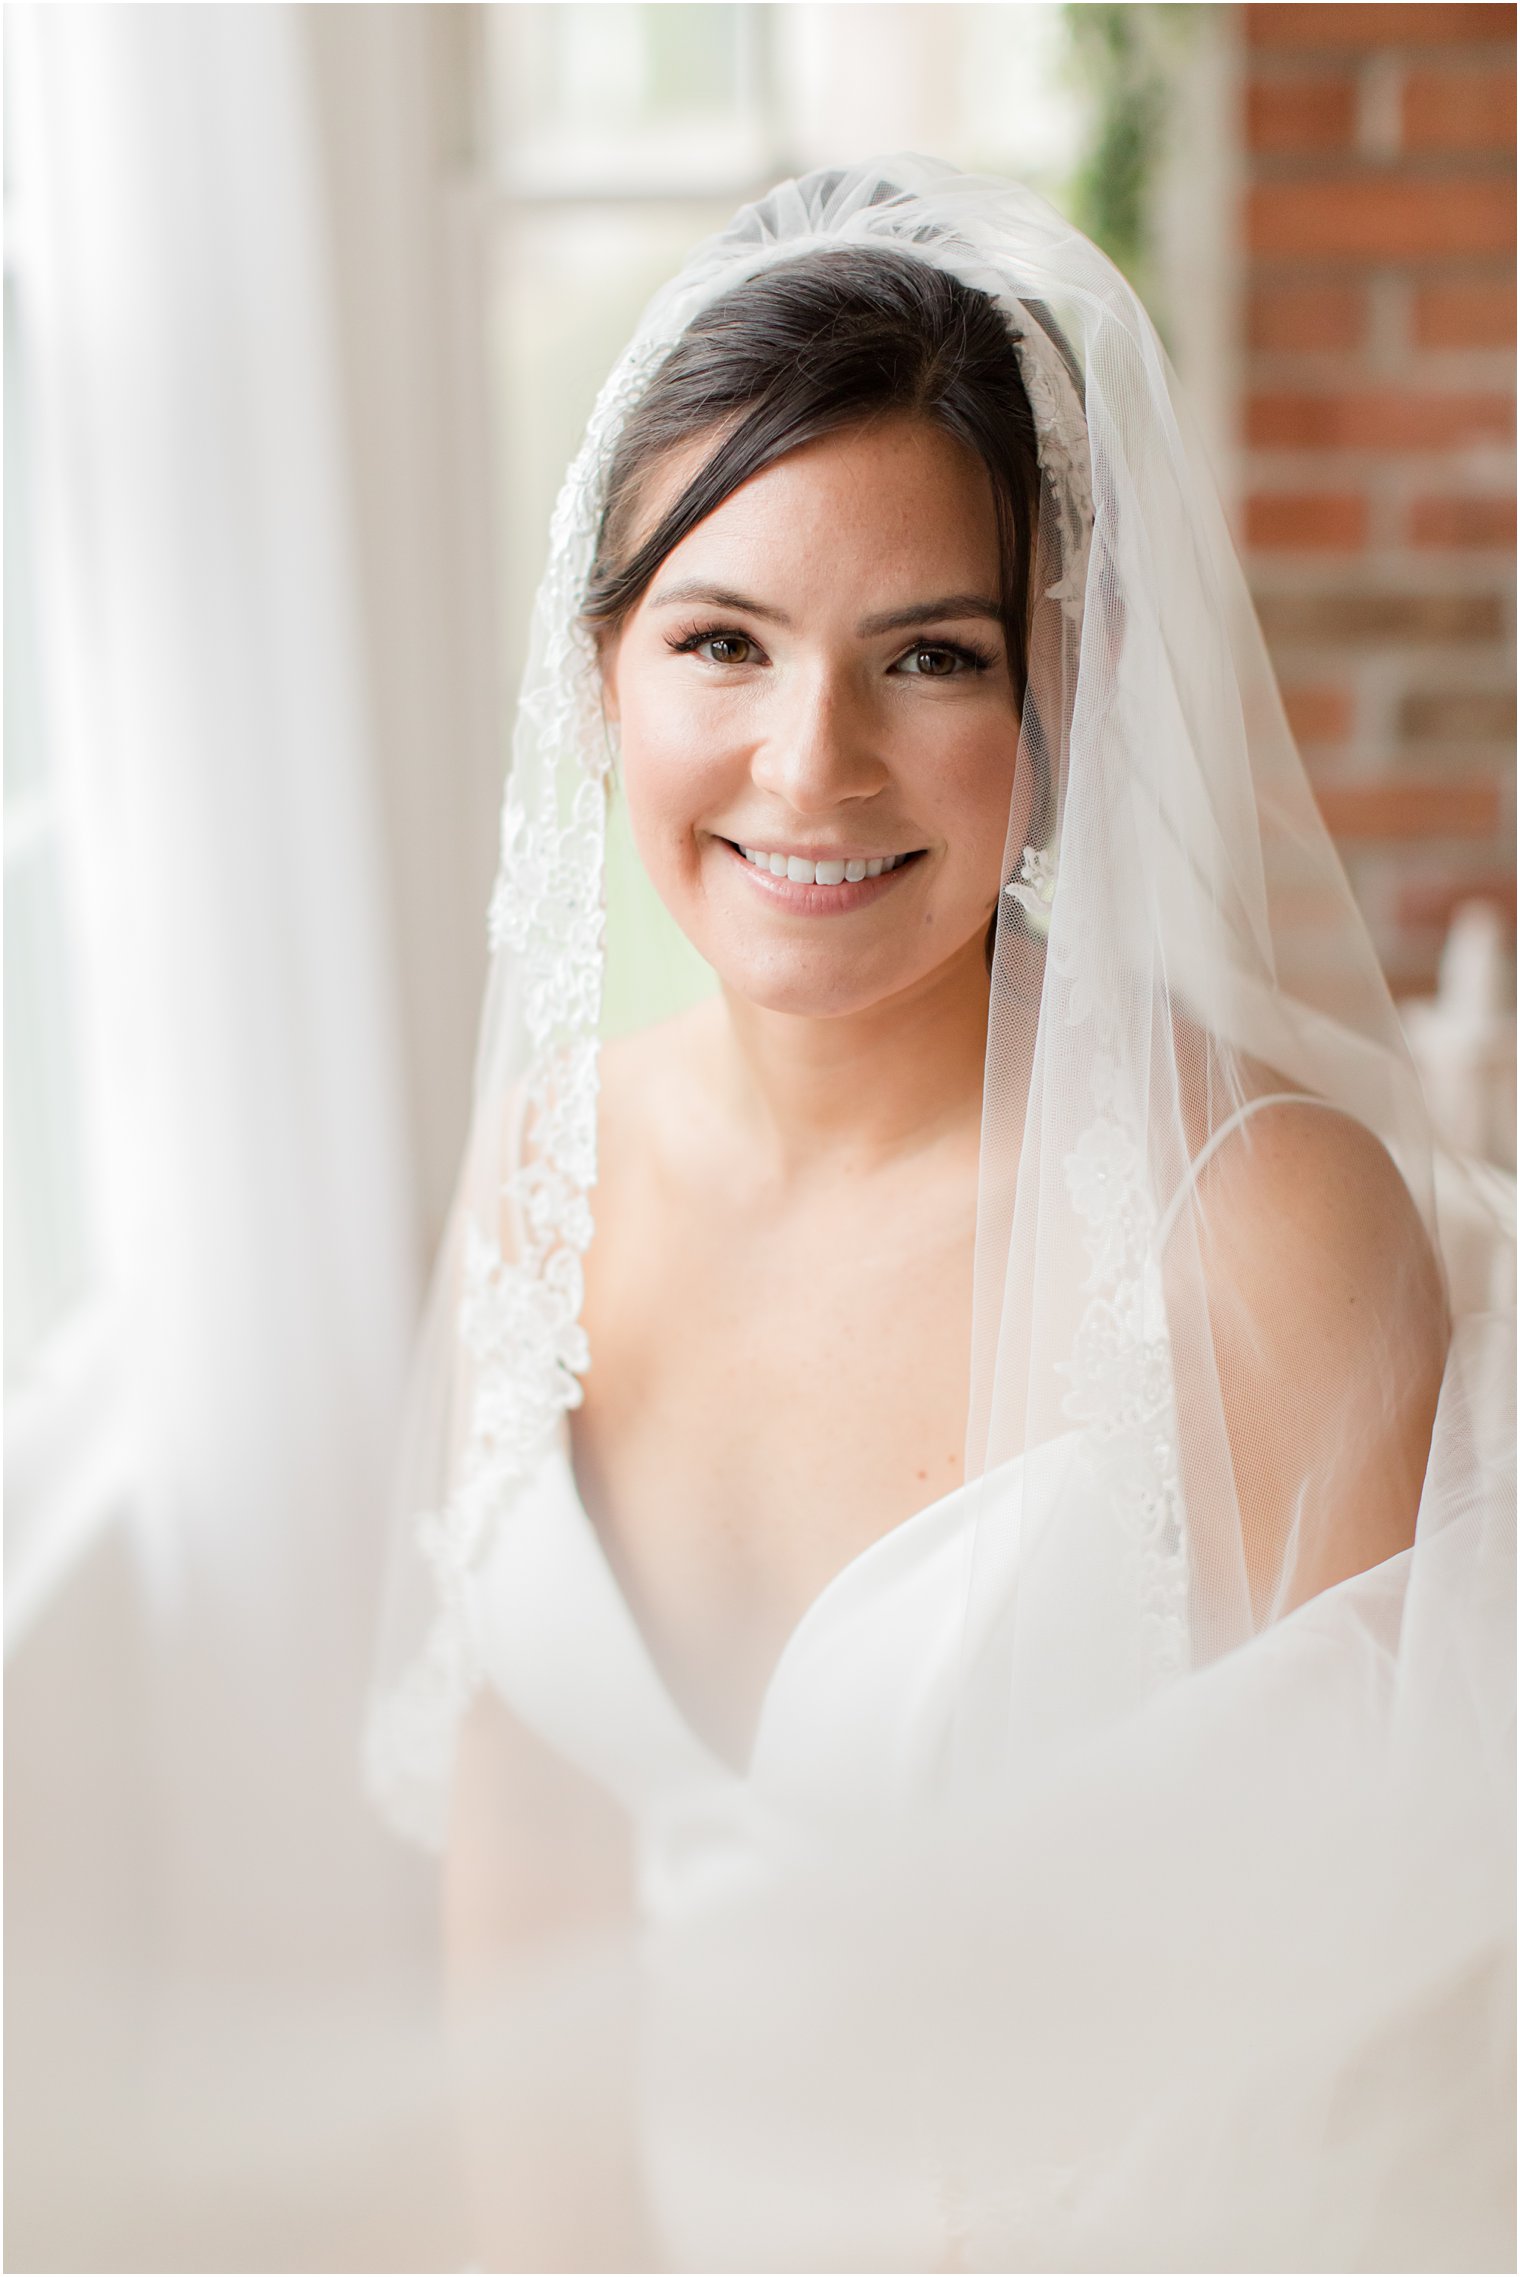 classic bridal portrait in New Jersey home